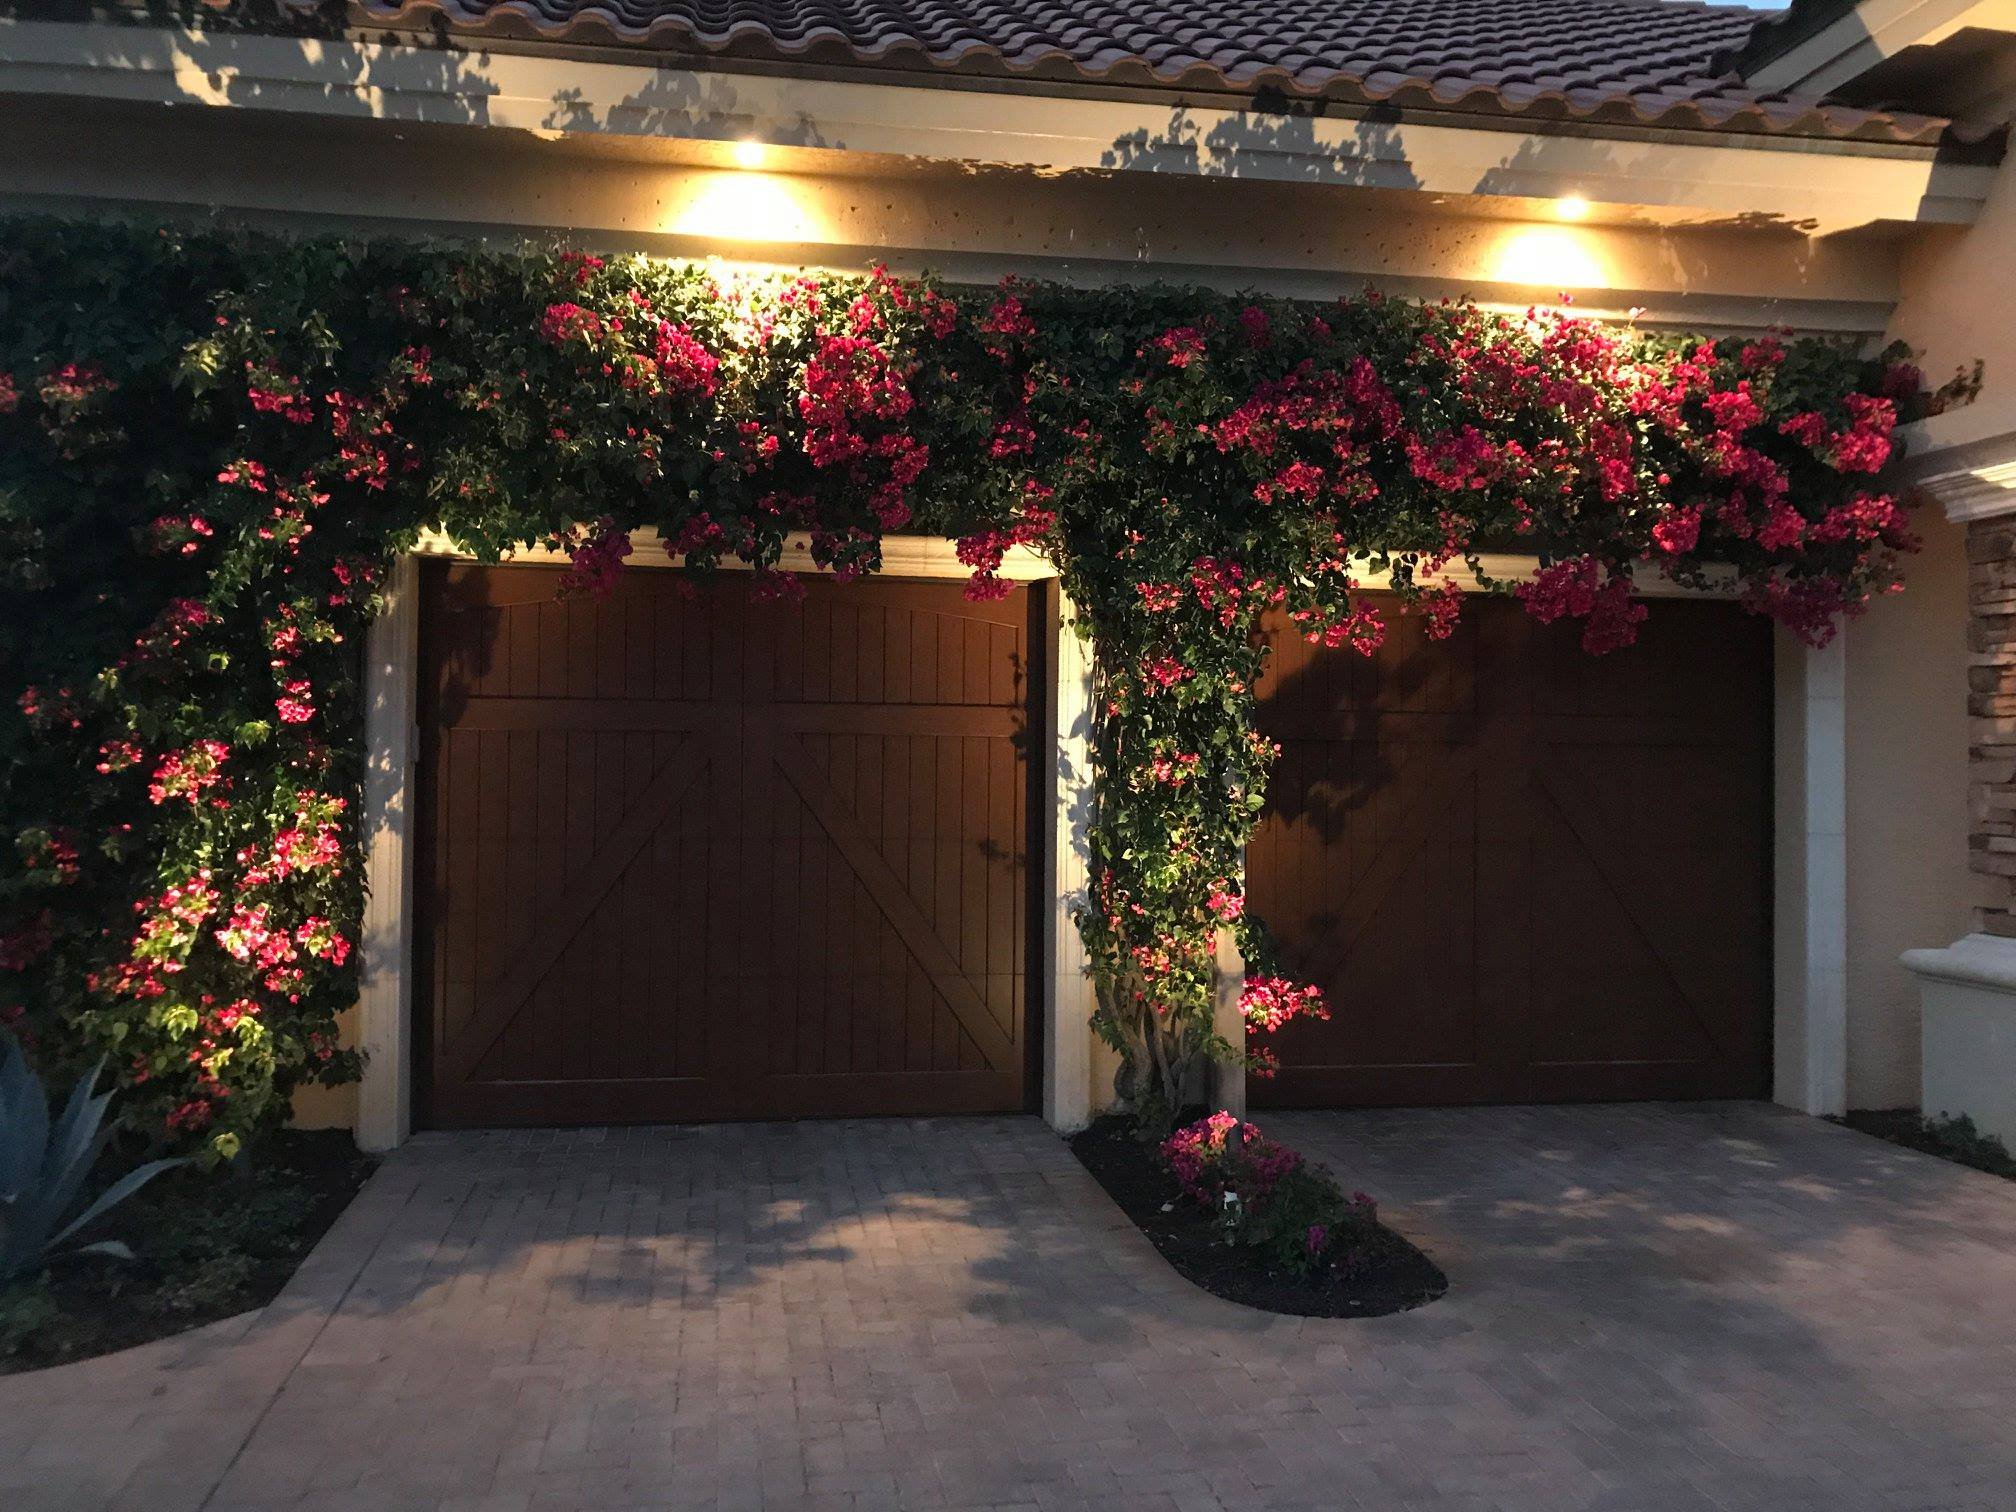  QUALITY LOW VOLTAGE LANDSCAPE LIGHTING SYSTEMS FOR HOME AND BUSINESS   Get On With It!  